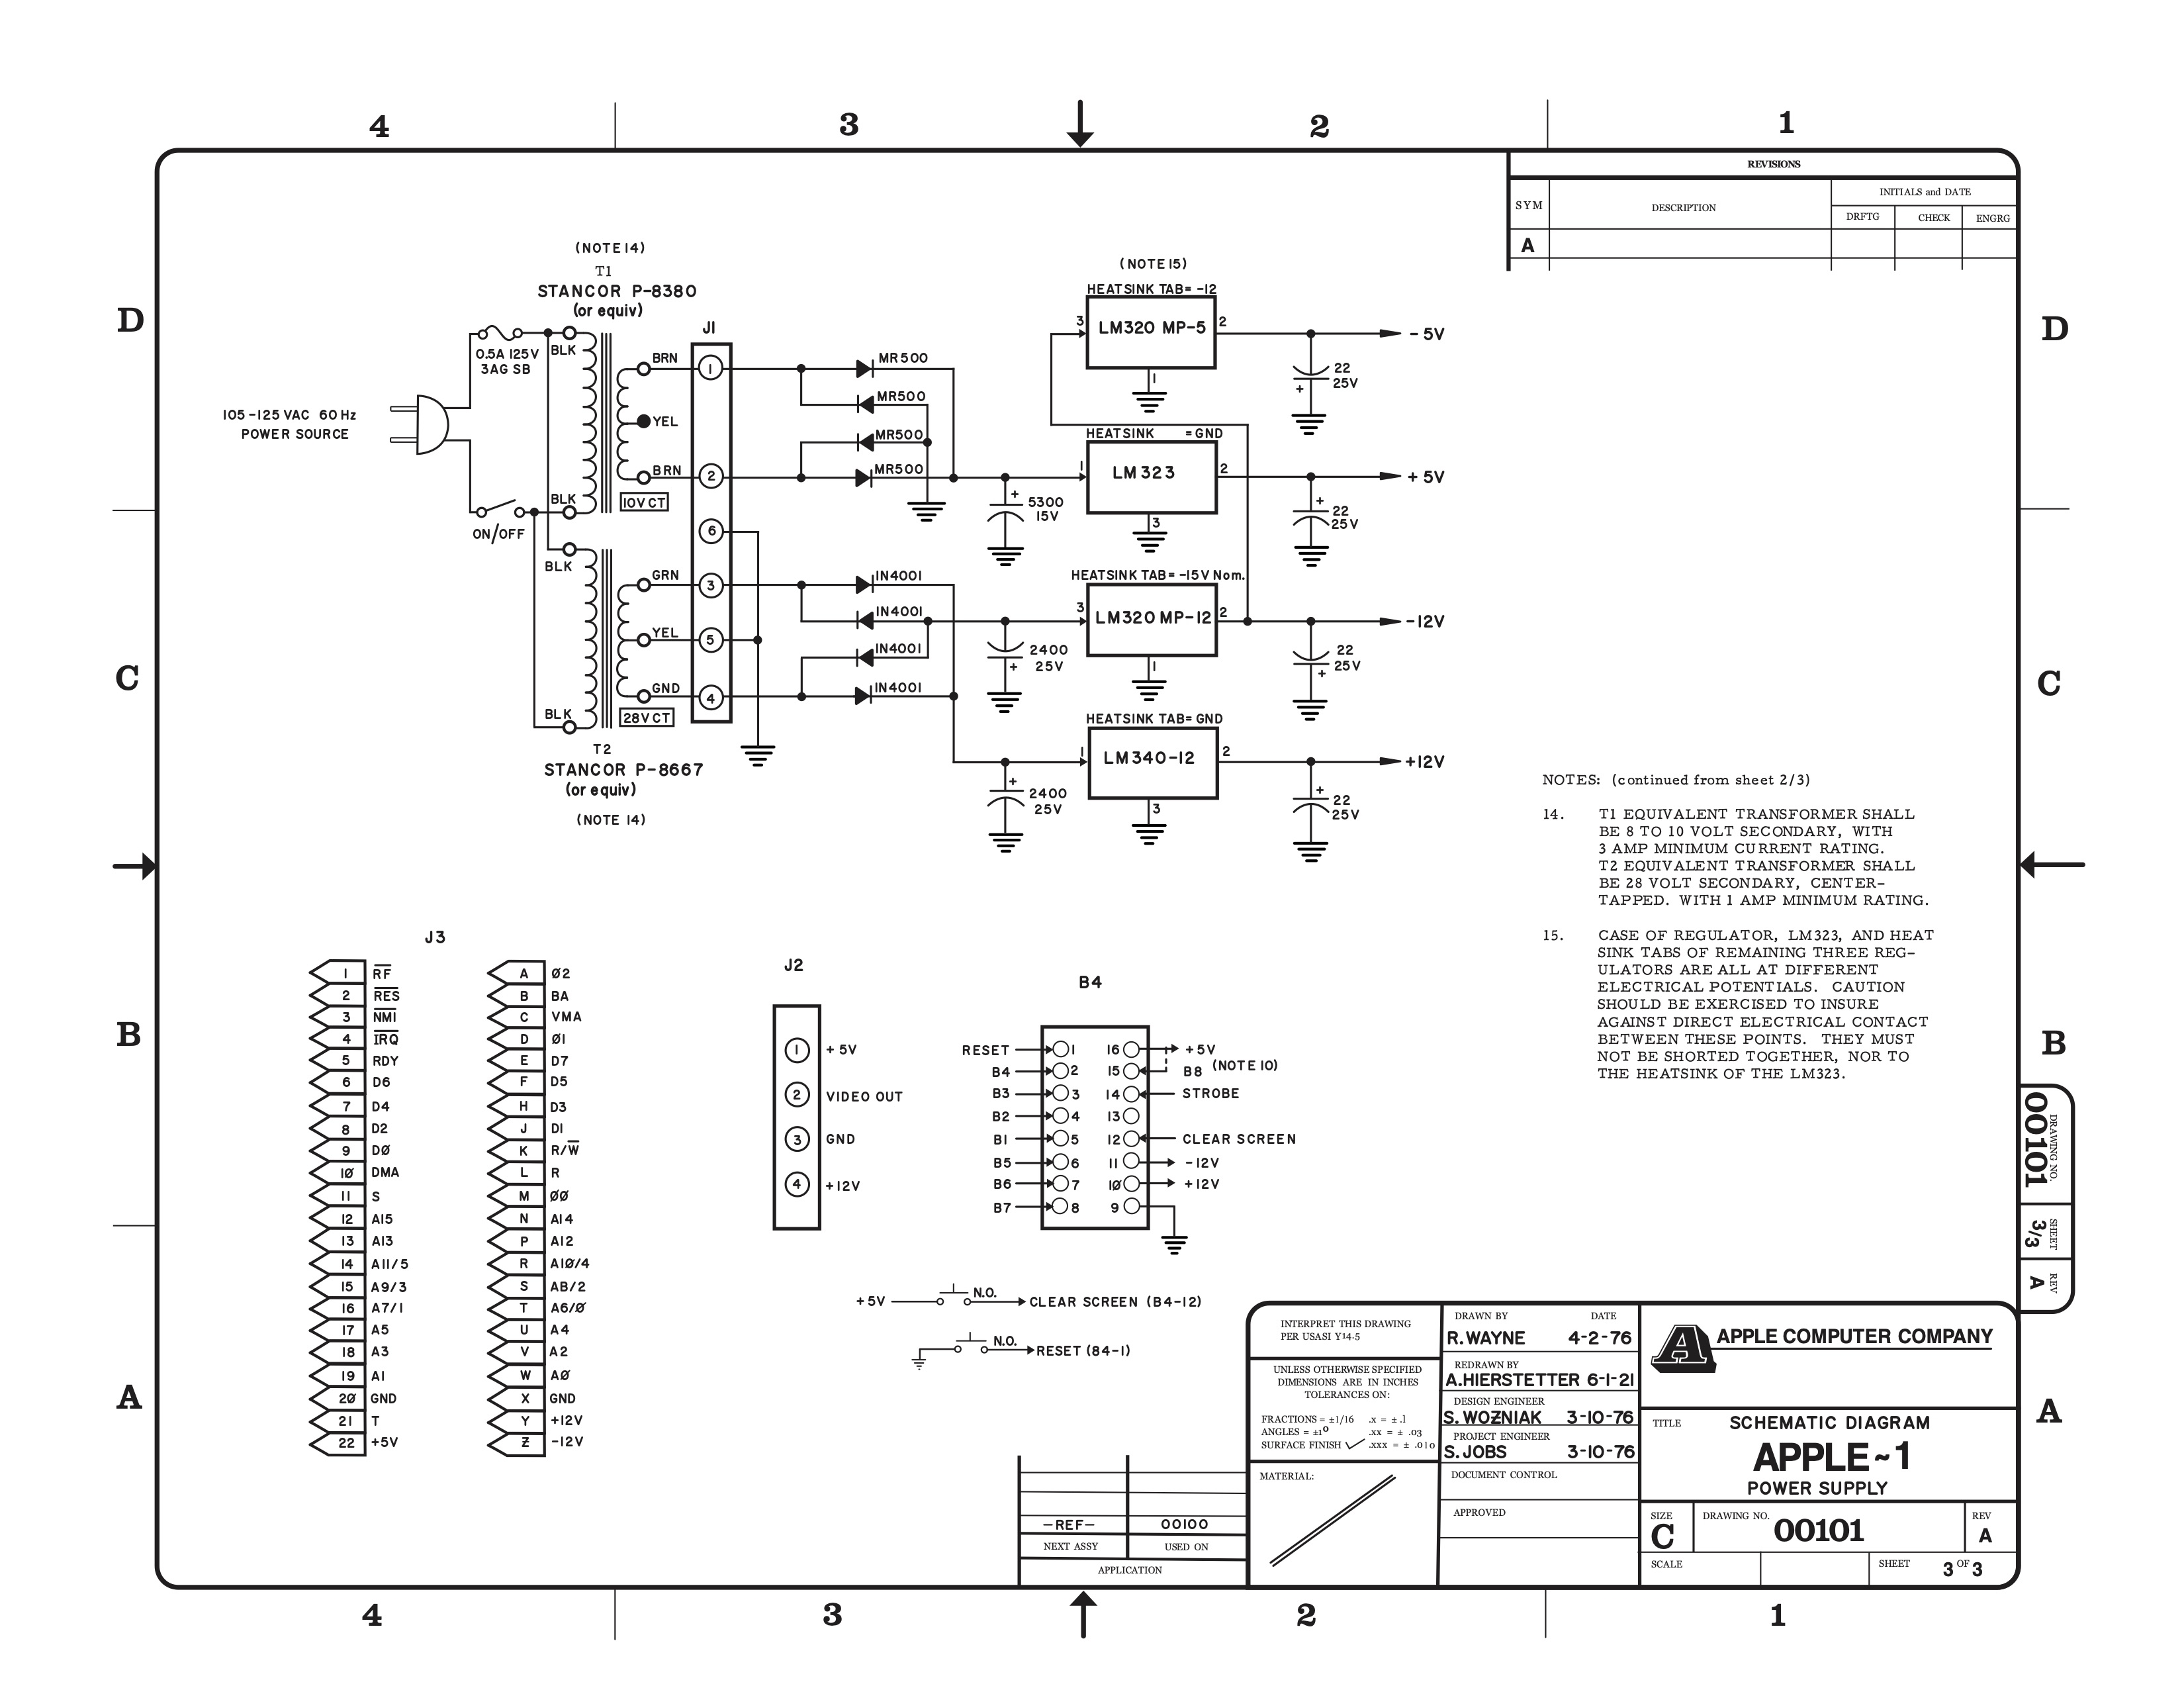 Re-Created Apple-1 Schematics by retroplace.com